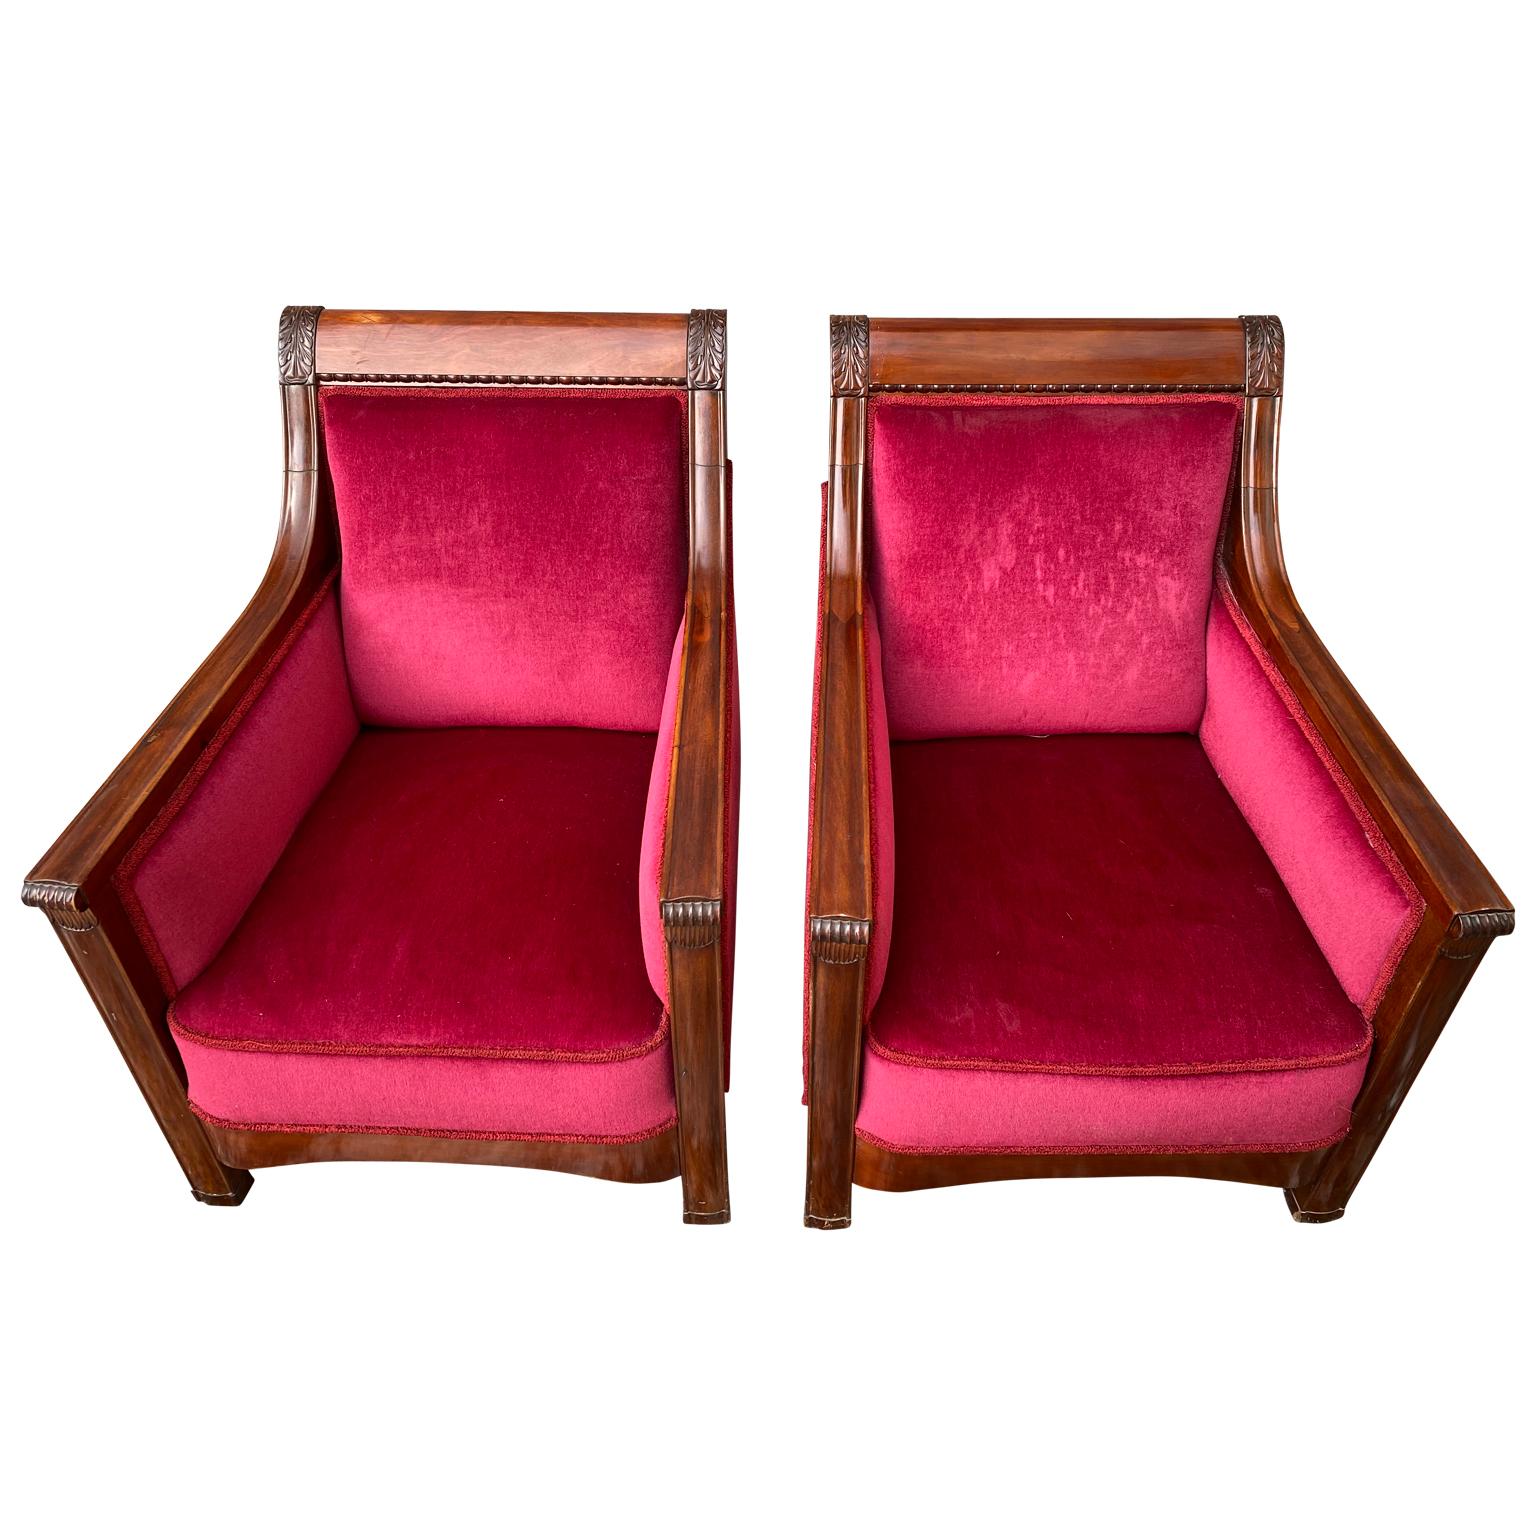 Jugendstil Pair of Large Swedish Jugend Mahogany Armchairs in Red Velvet Fabric